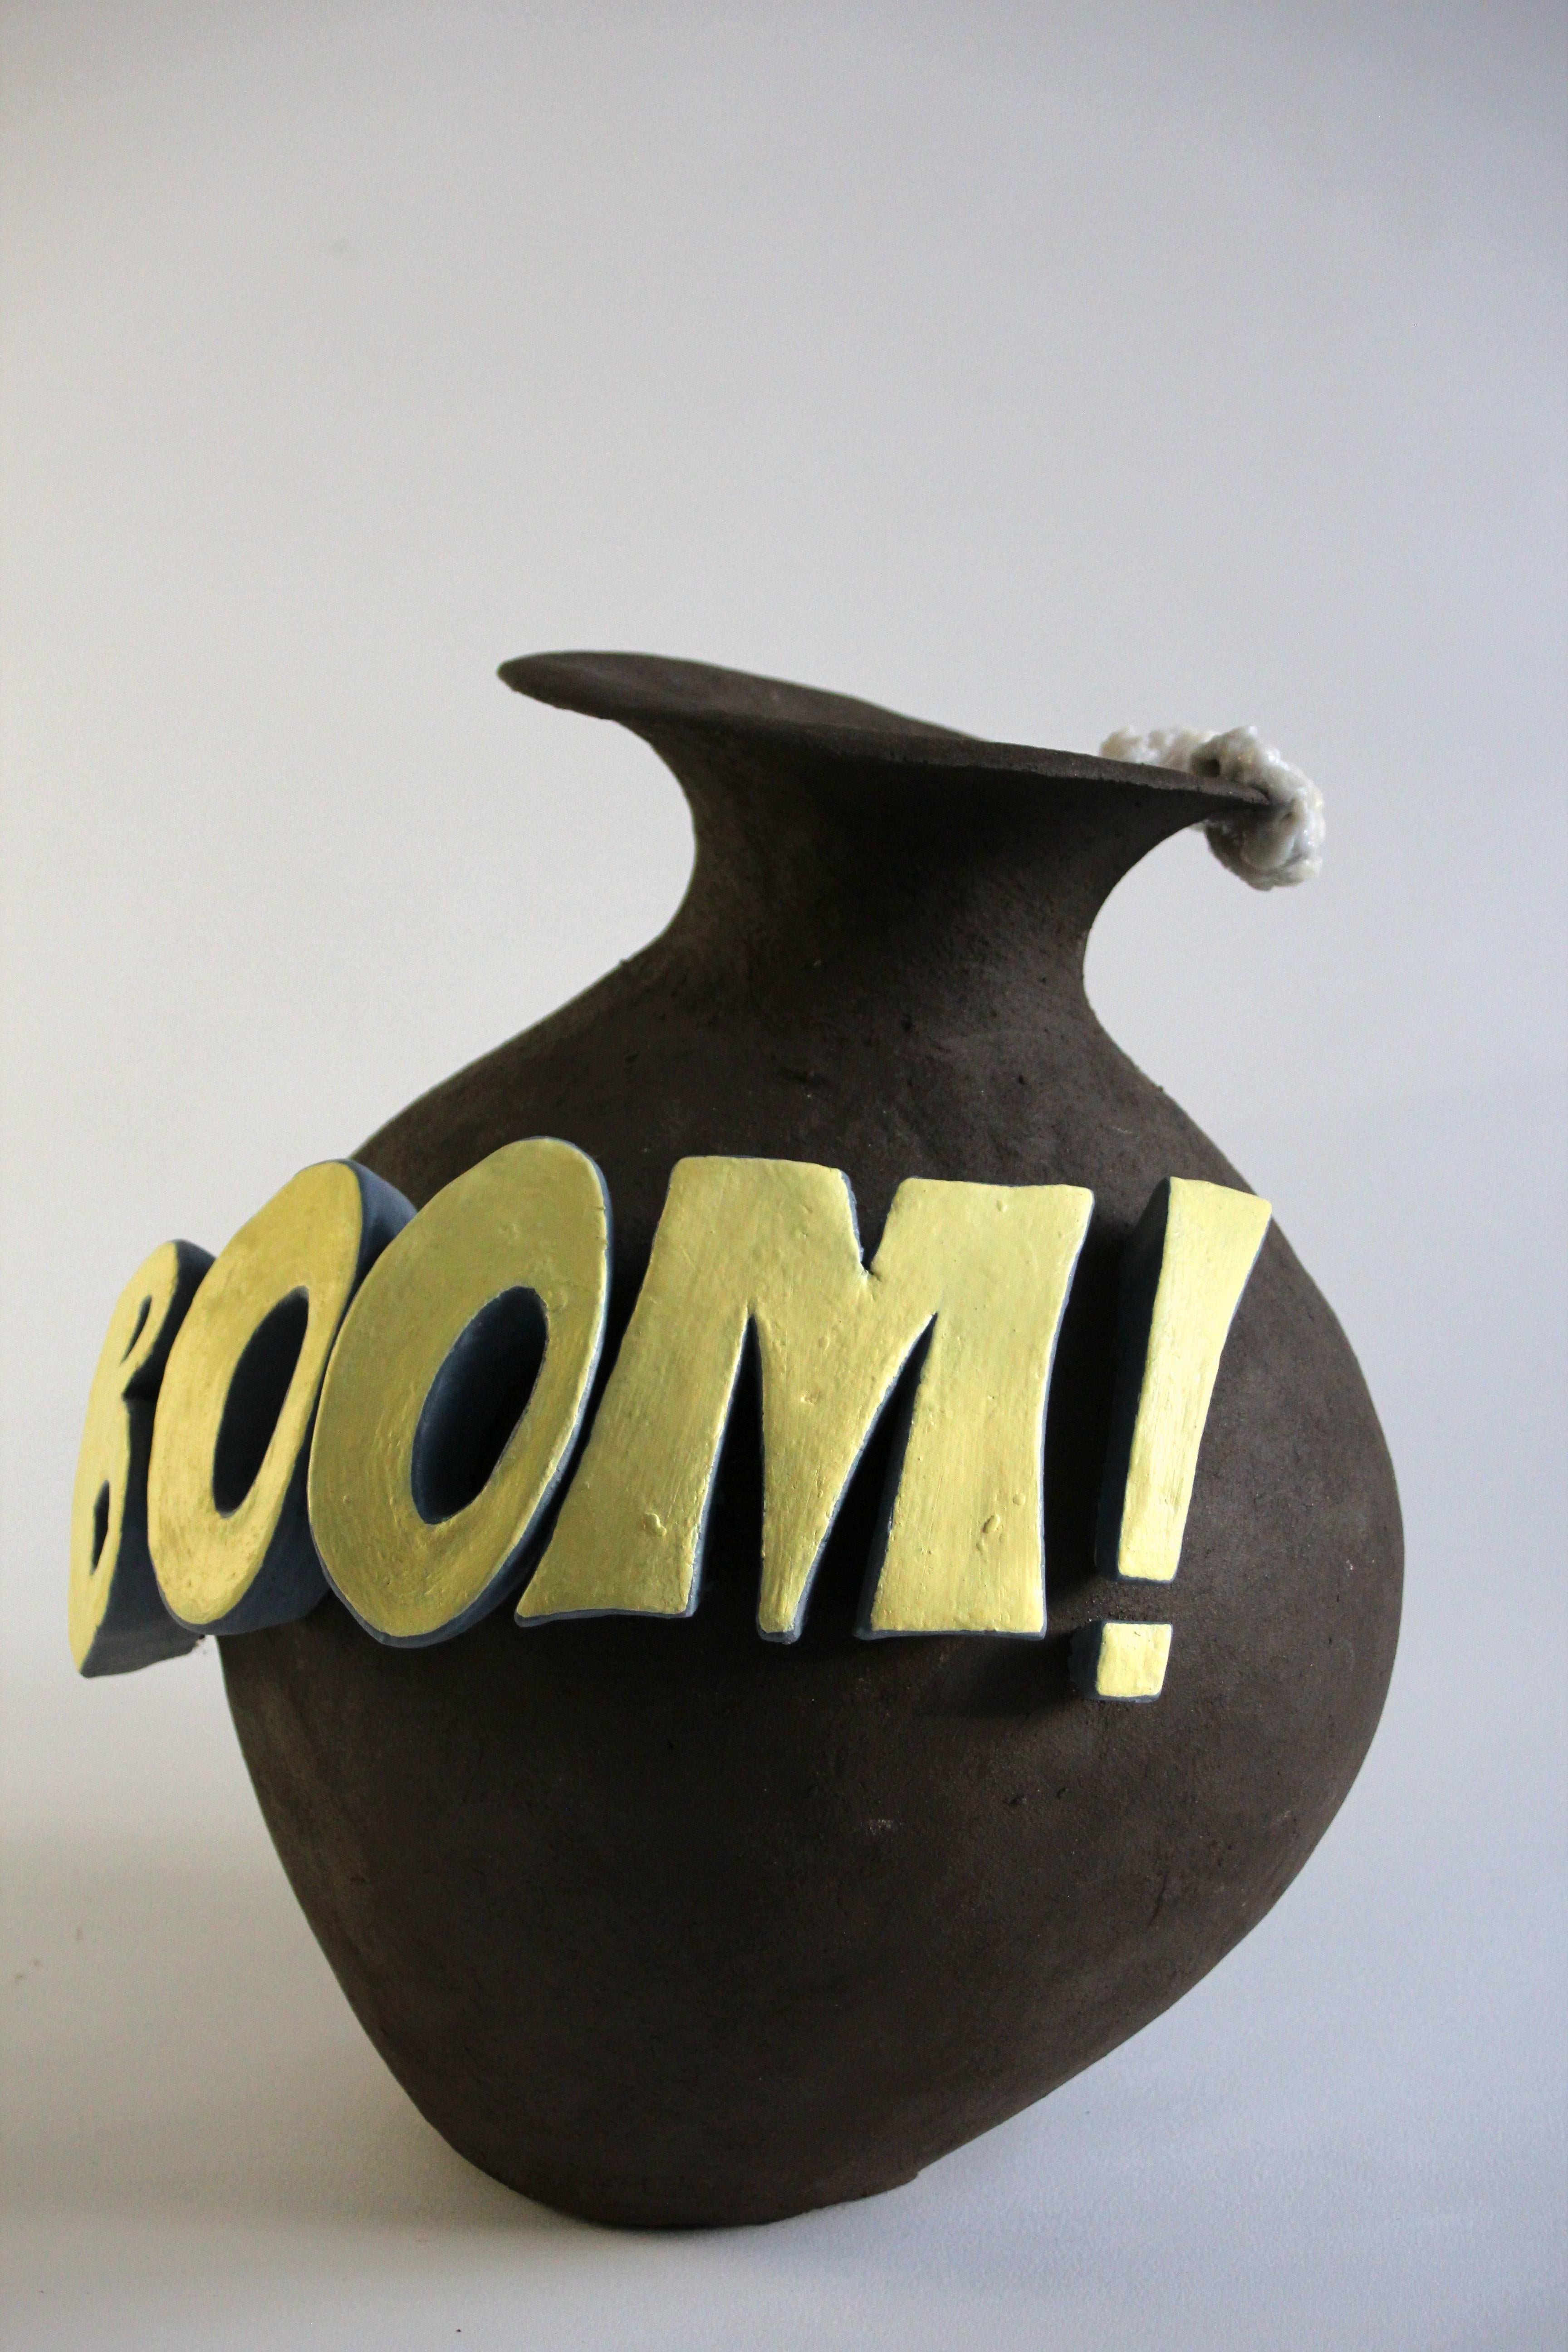 Boom!
Ceramic vase design object. This is one-of-a-kind product and hand built ceramic. On the side of this vessel is cartoon styled fonts with word Boom!
Letters are made of clay and painted after vase is burned in ceramic kiln. 
On the edge is